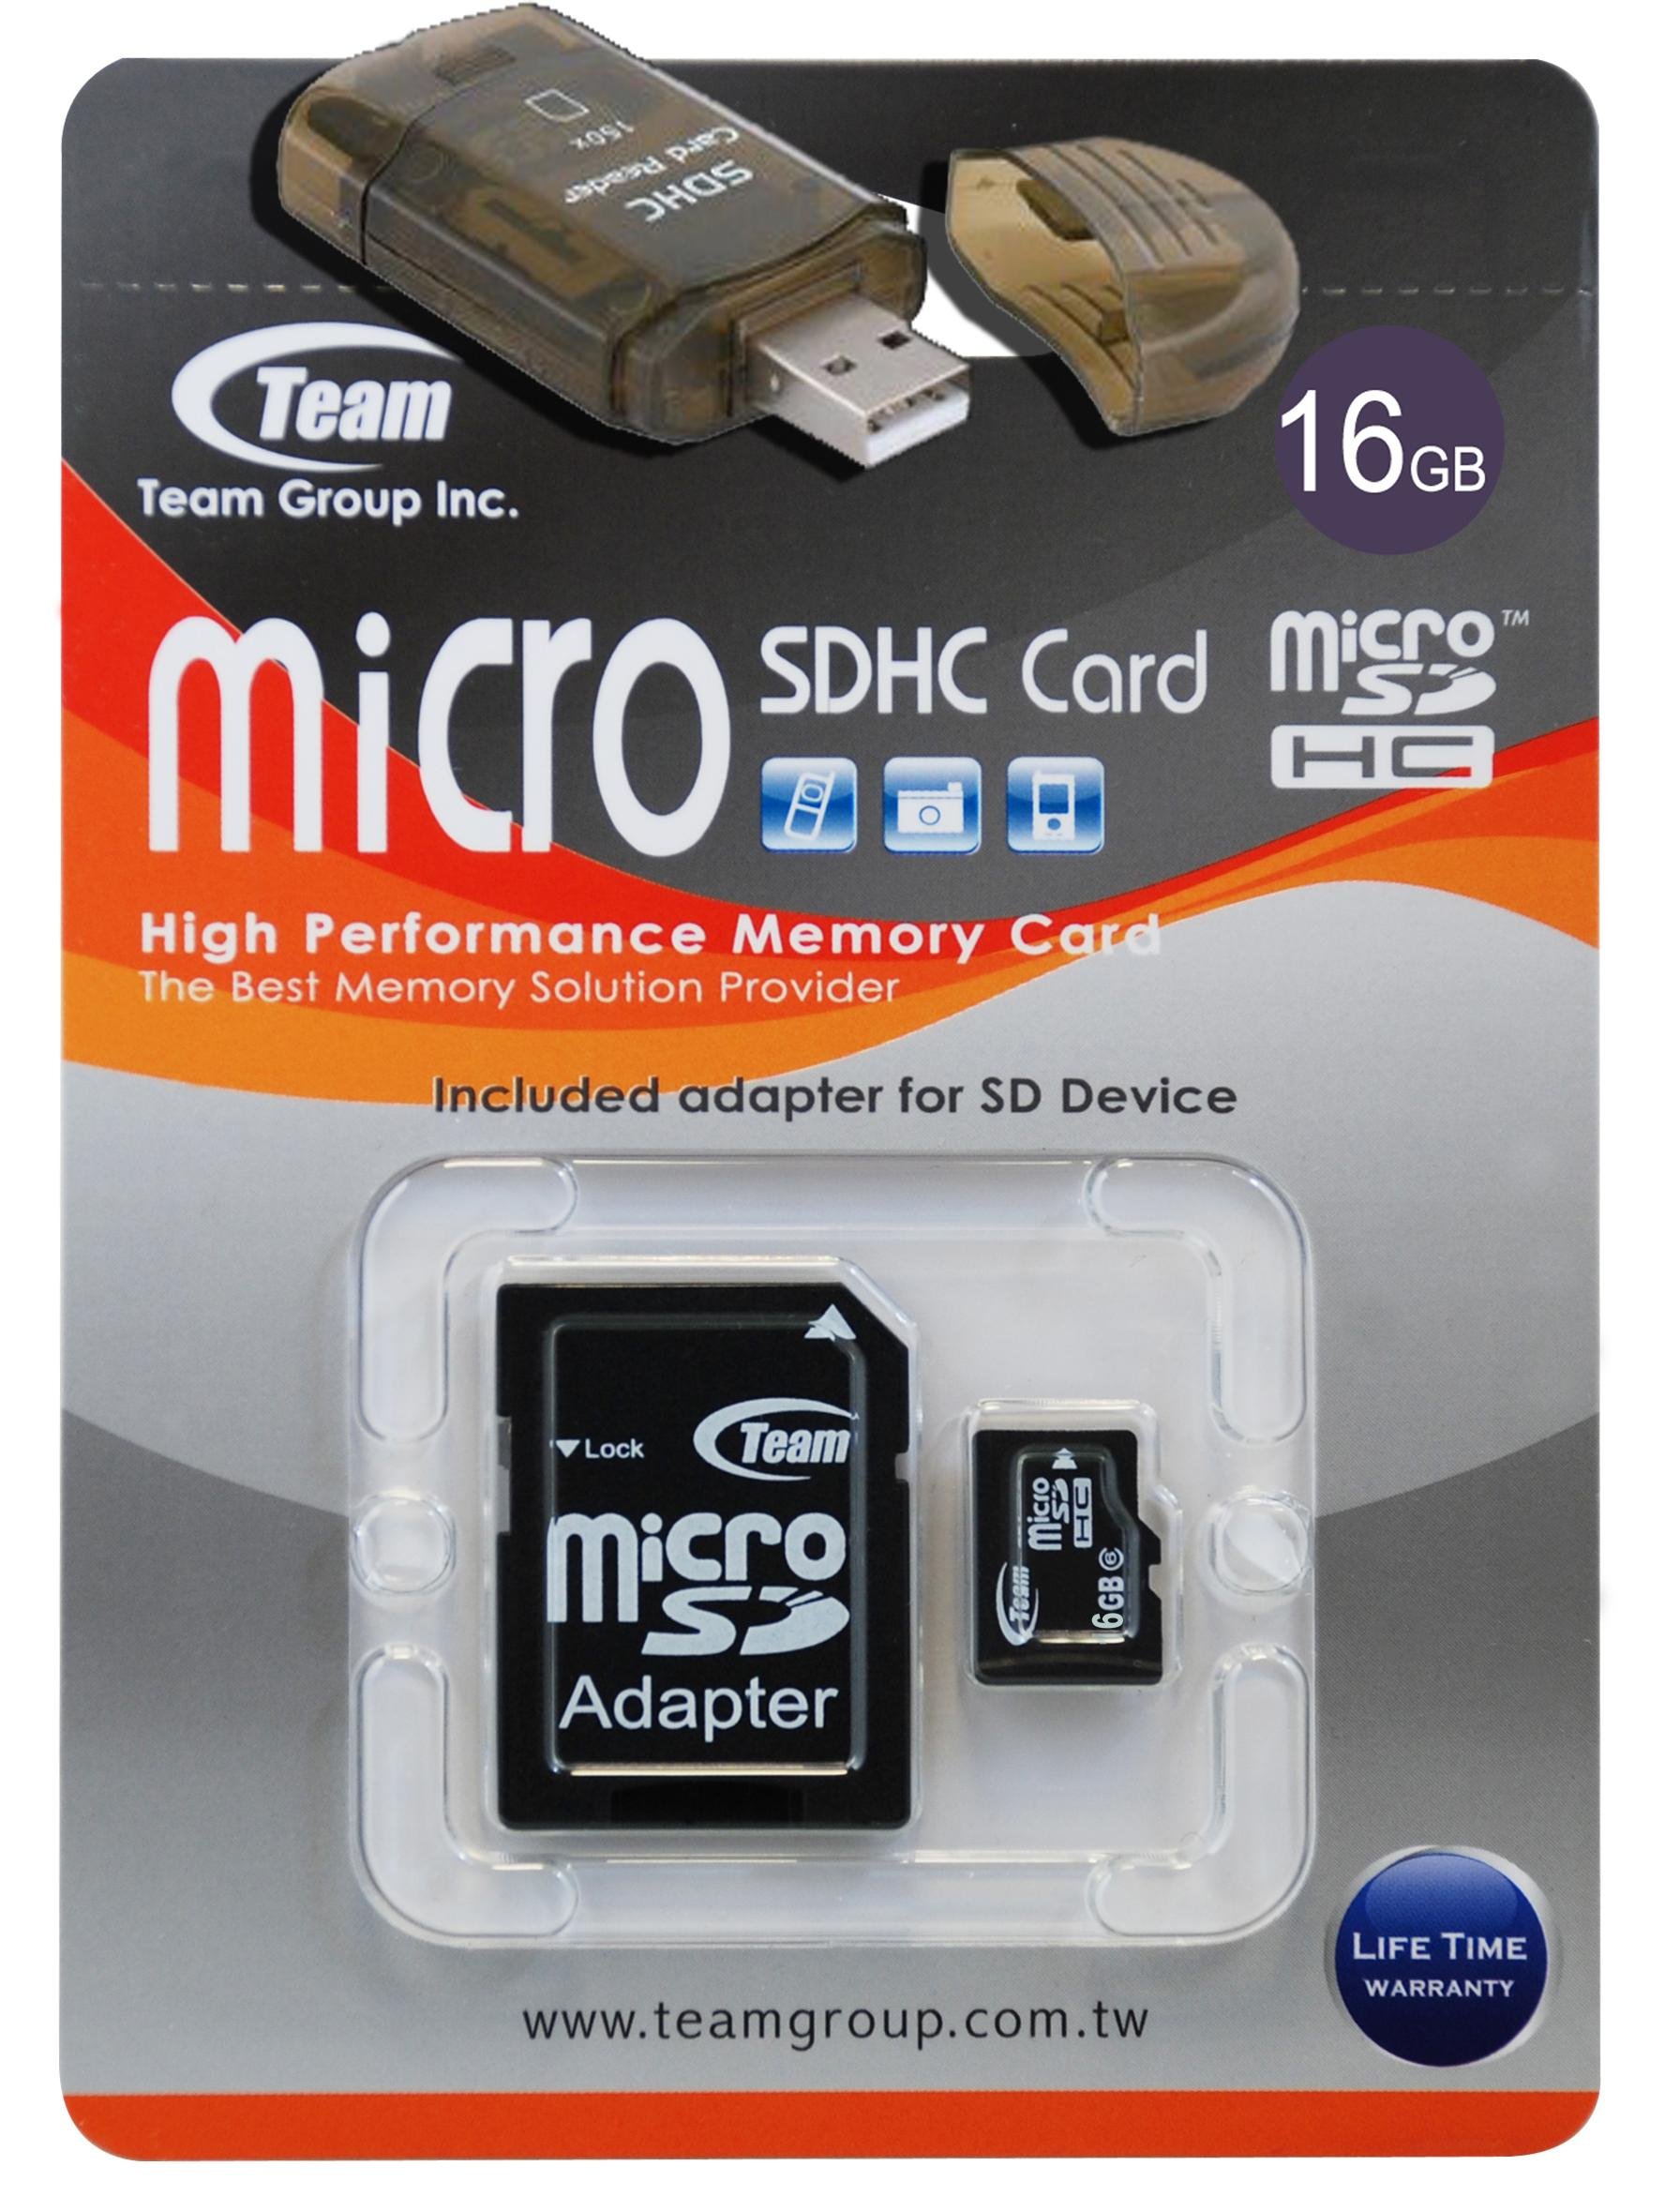 16GB Turbo Speed Class 6 MicroSDHC Memory Card For SAMSUNG SCH-U960 SGH-A637. High Speed Card Comes with a free SD and USB Ad